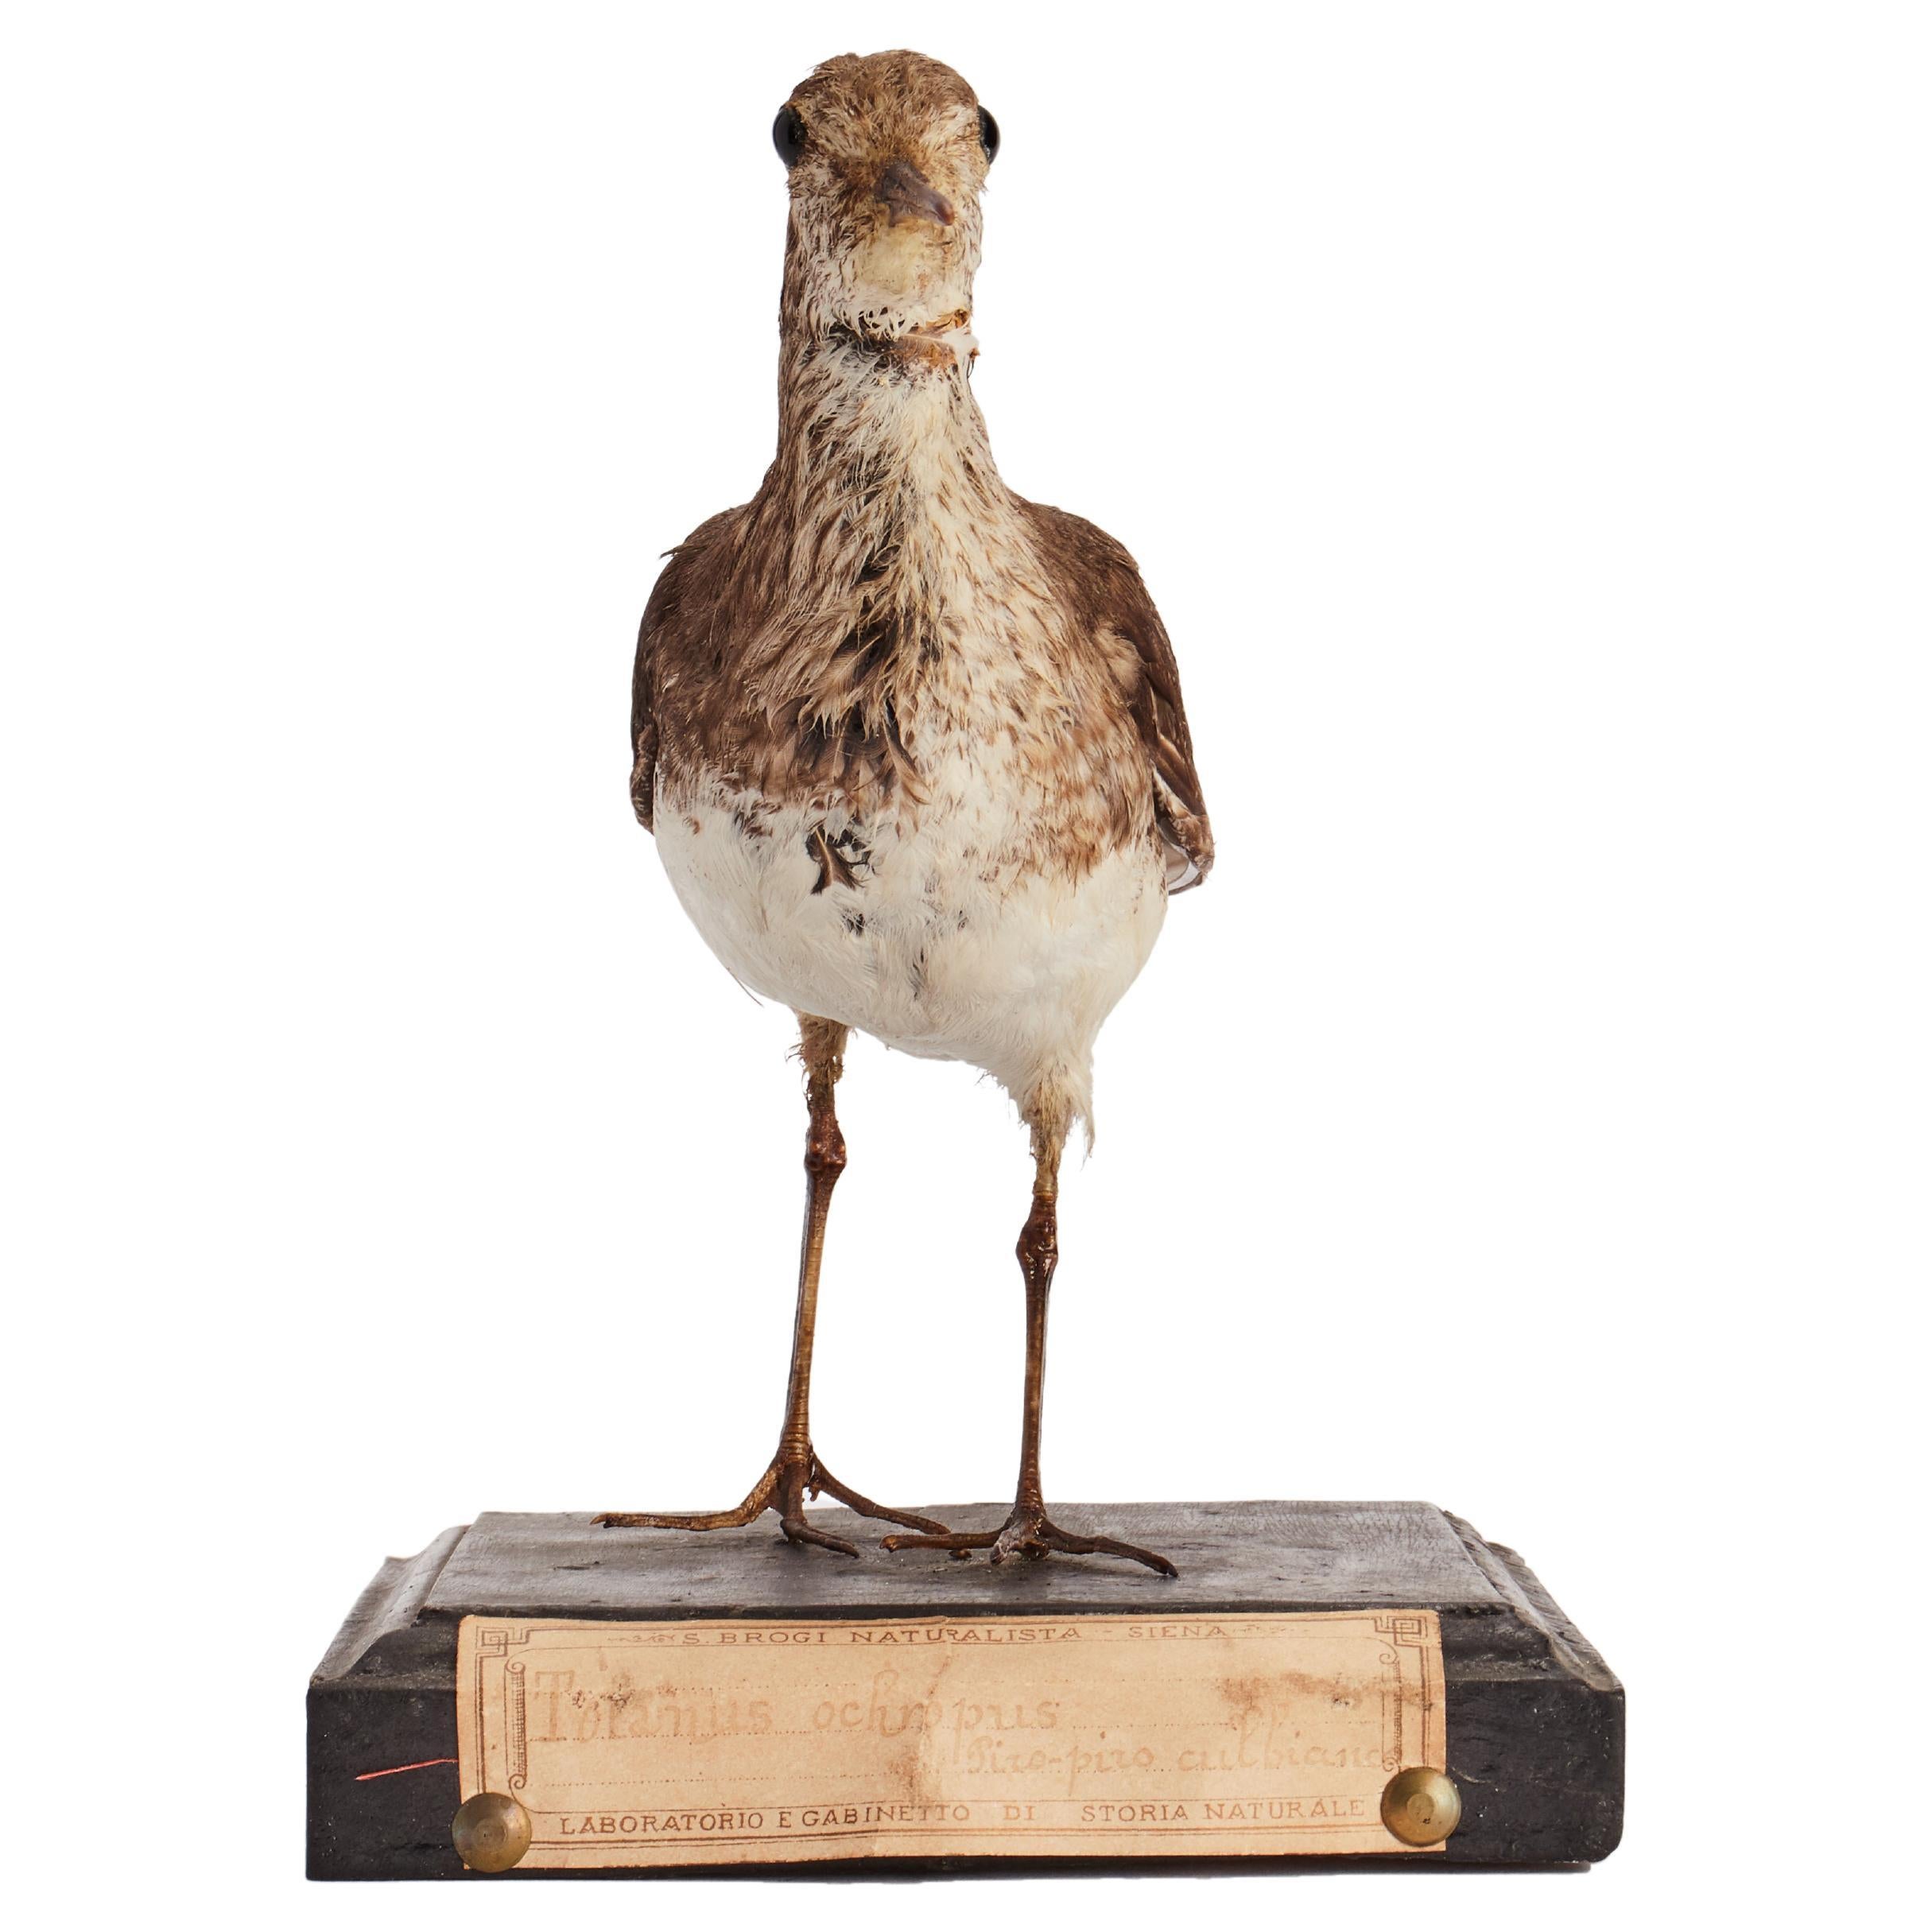 Natural specimen from Wunderkammer Stuffed bird Green Sandpiper (Tringa Ochropus) mounted on a wooden base with cartouche Specimen for laboratory and Natural history cabinet. S. Brogi Naturalista. Siena, Italy 1880 ca.